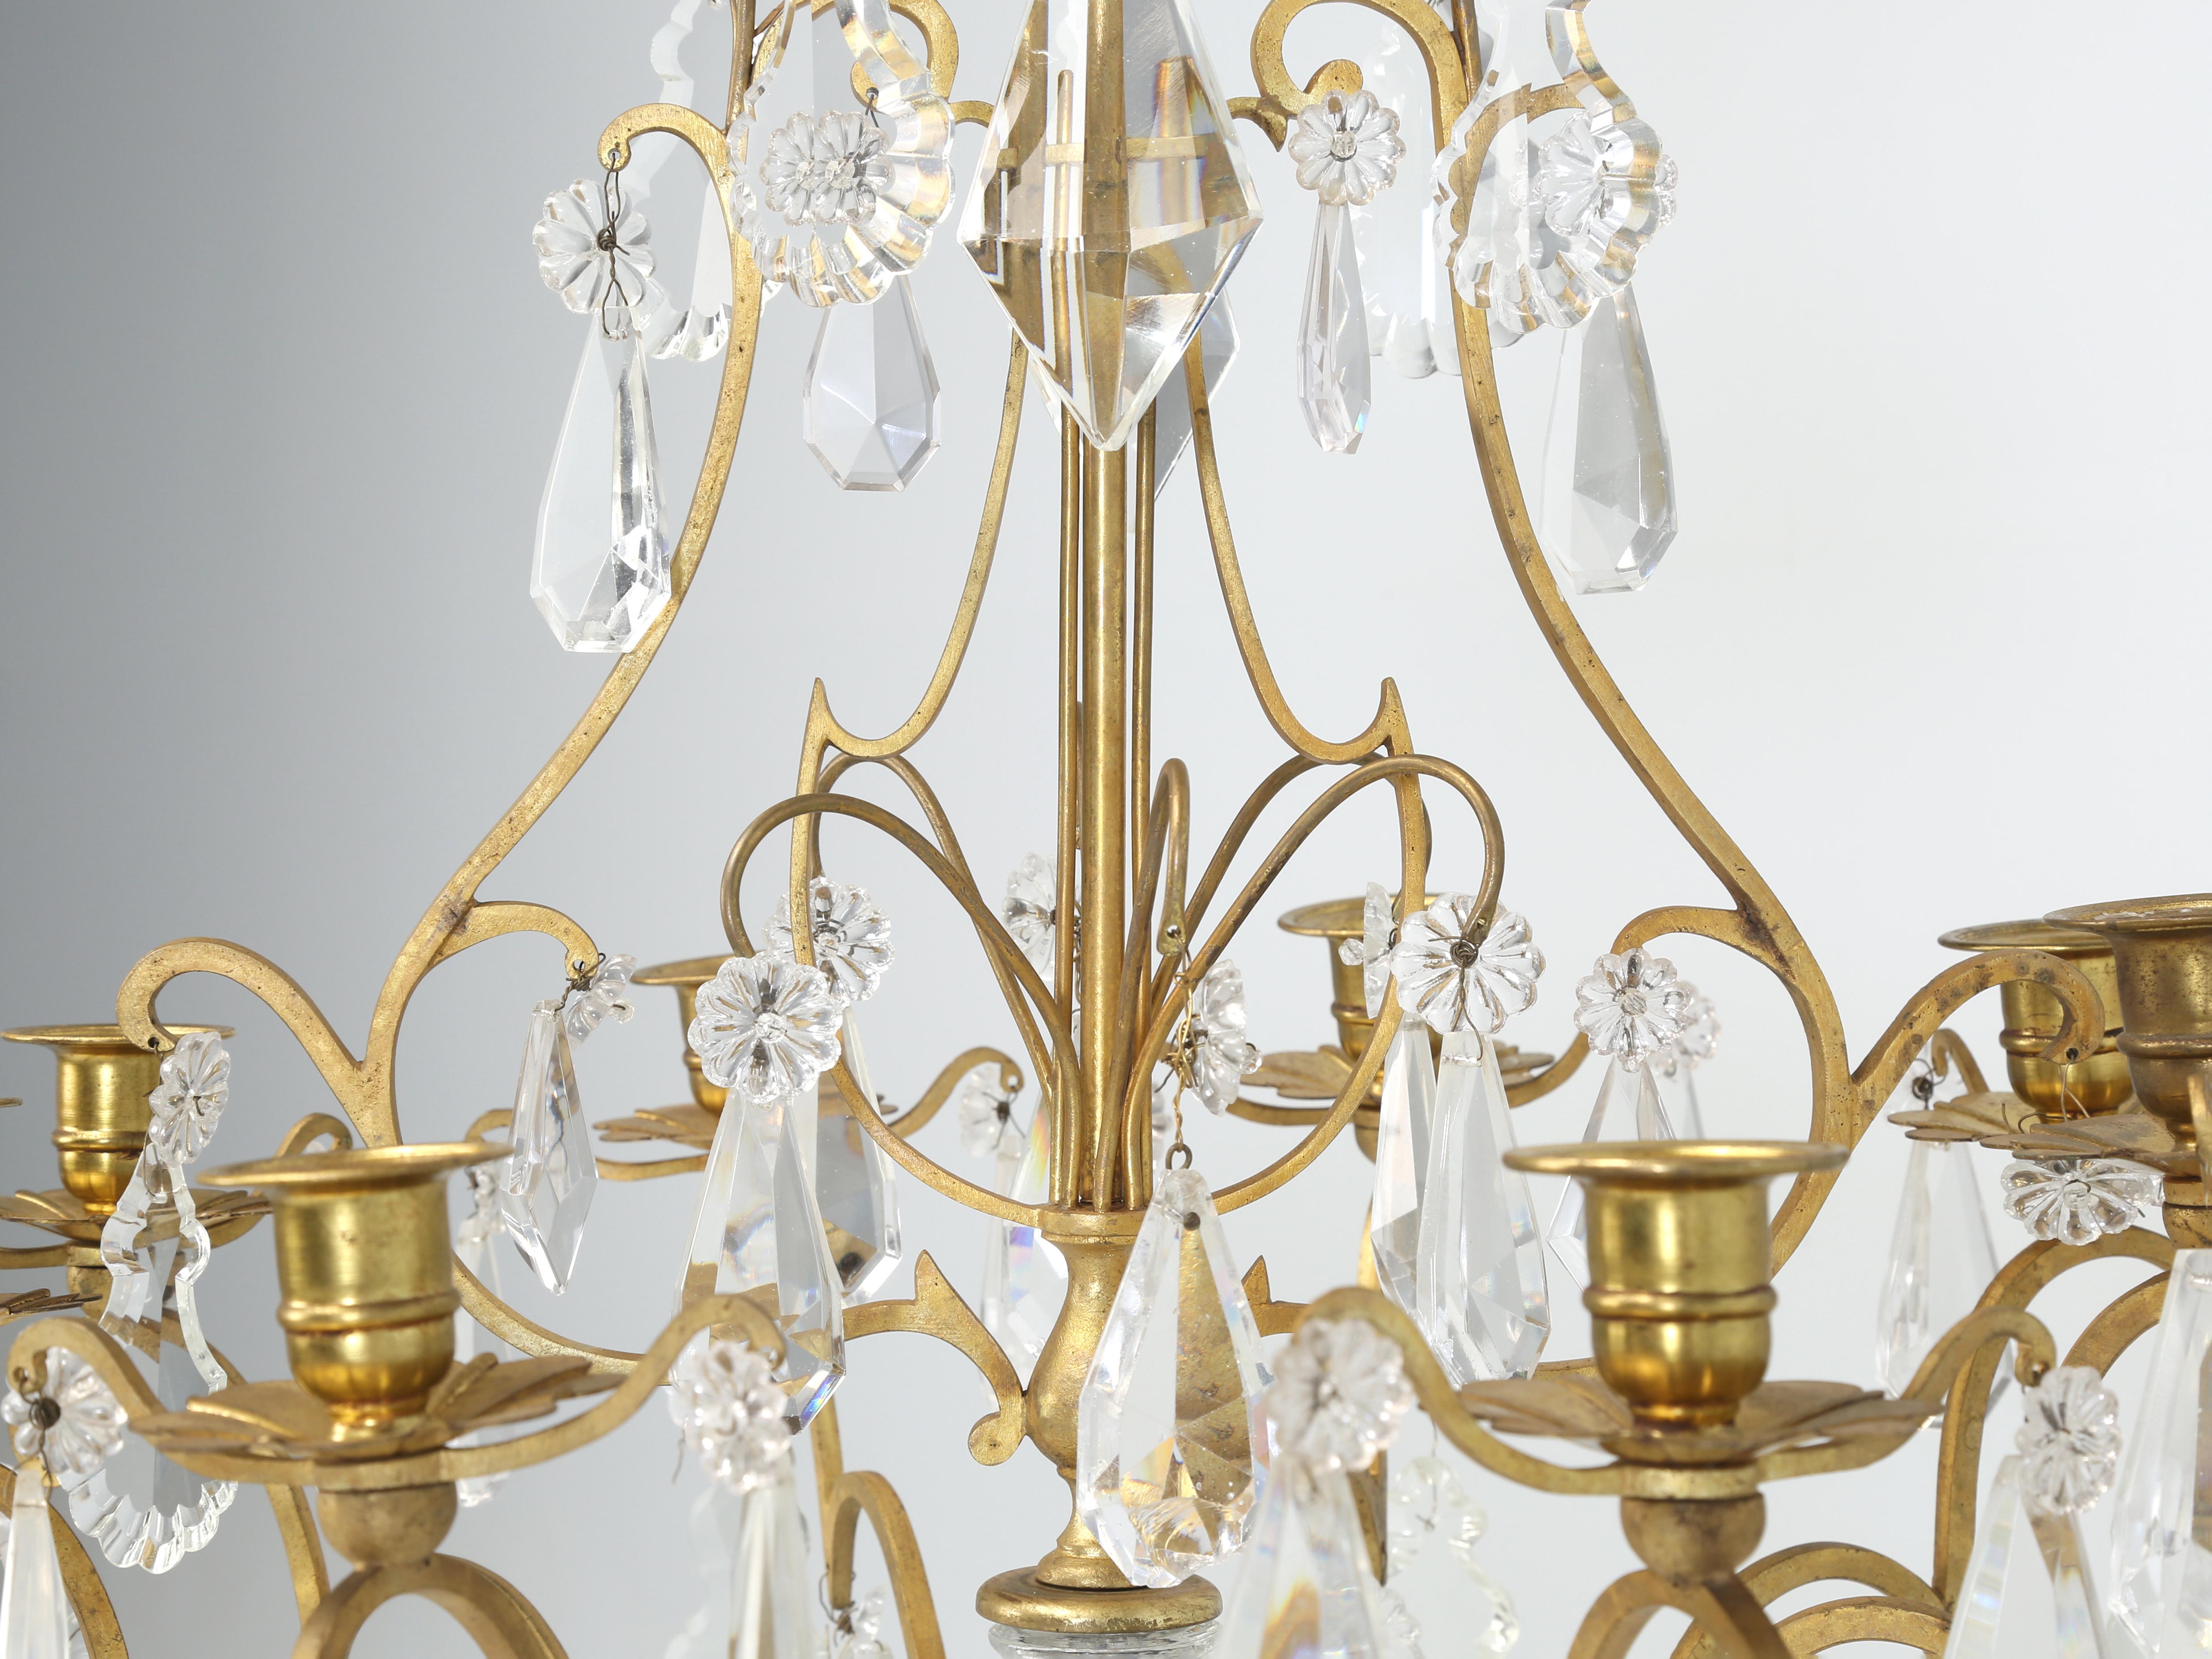 Gold Antique French Doré Bronze Exquisite Chandelier Set Up for Candles Mid-1800s  For Sale